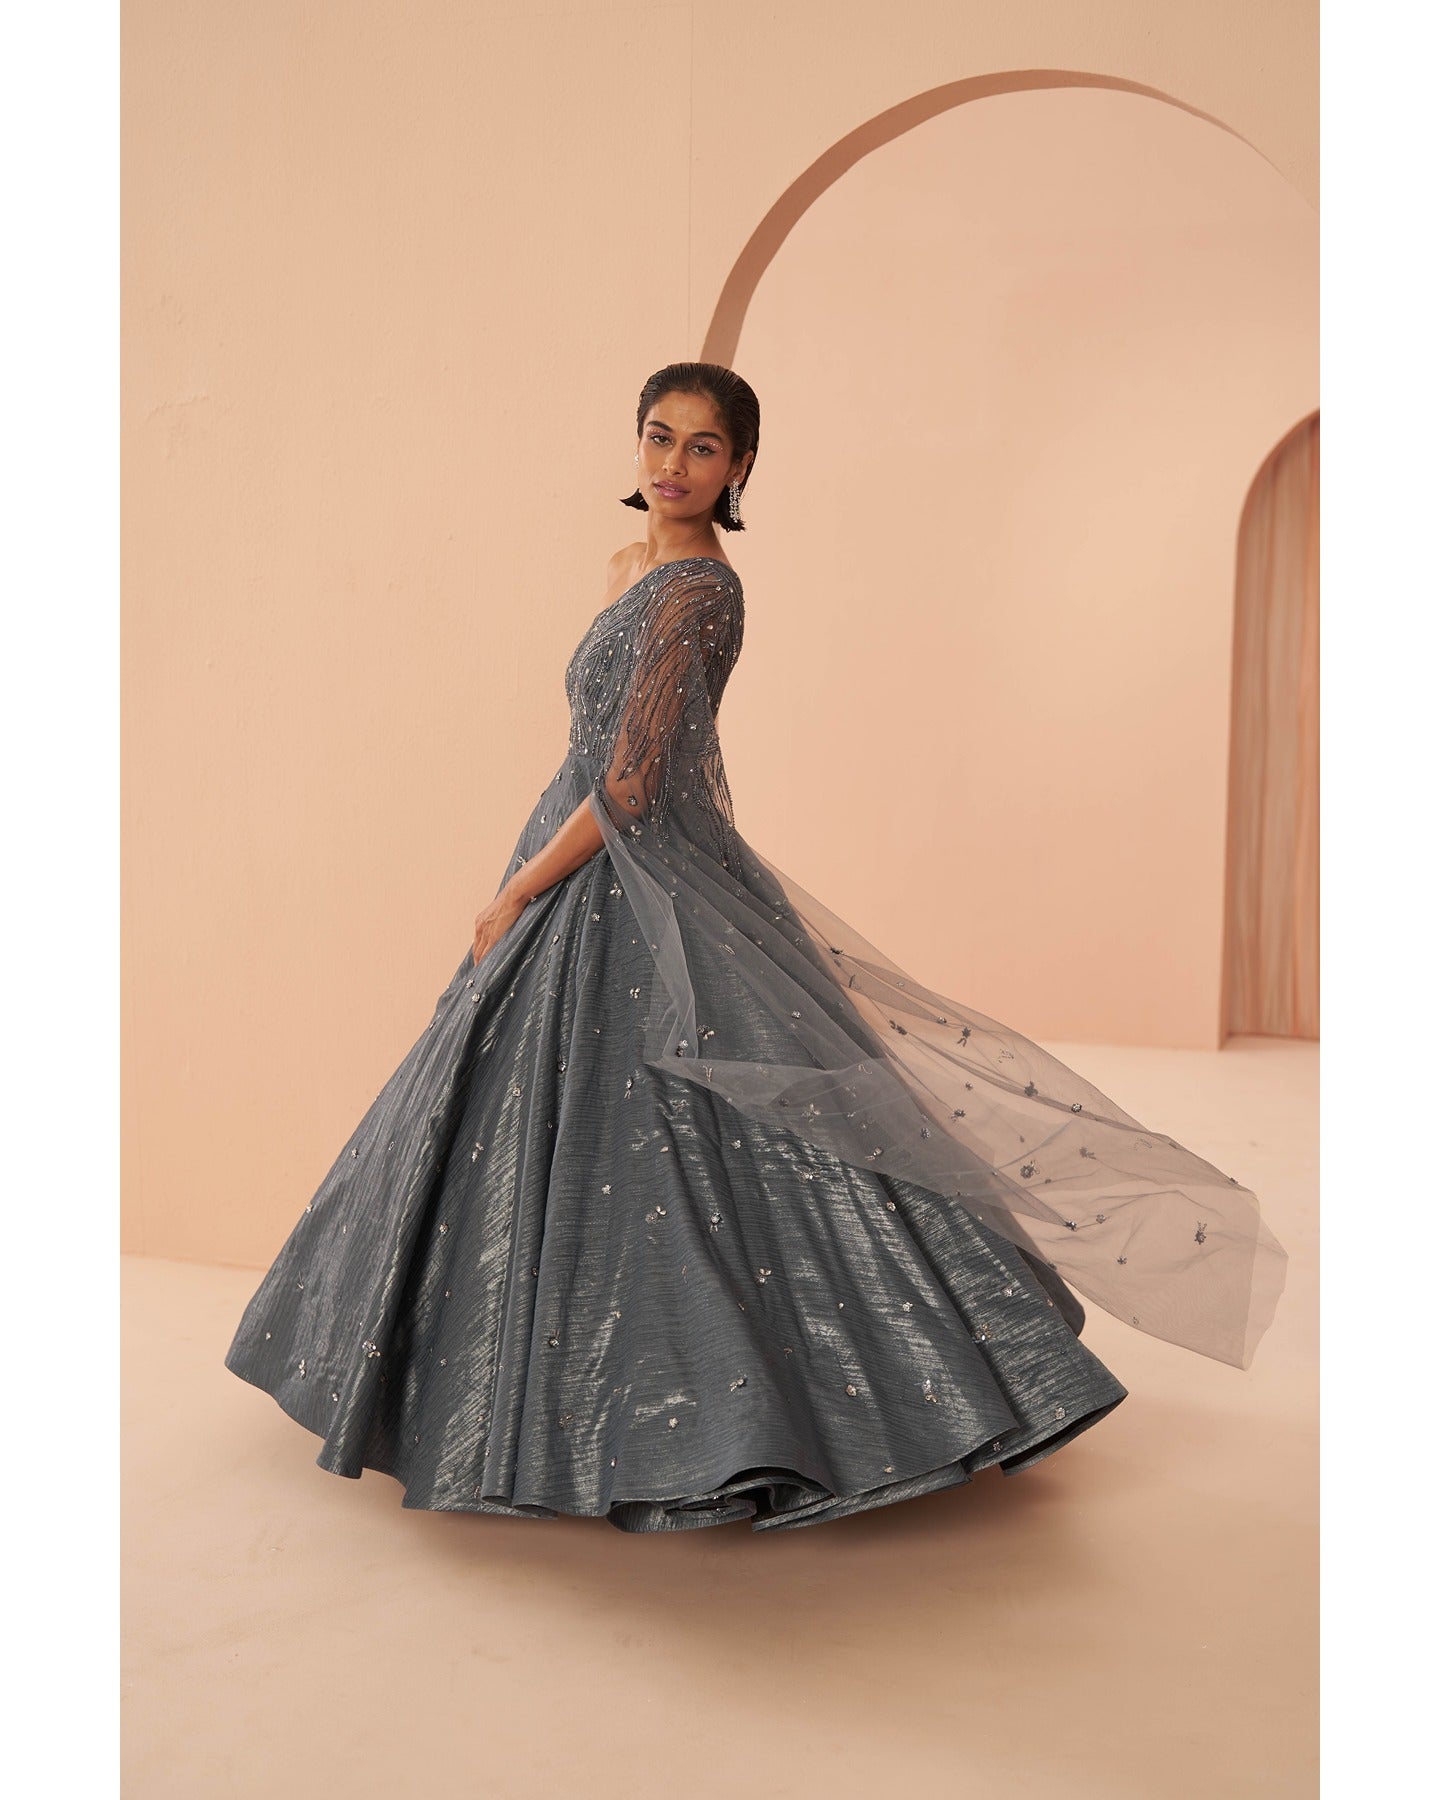 Sapphire Splendor: Hand-embroidered grace adorns this one-shoulder gown in a captivating shade of blue.